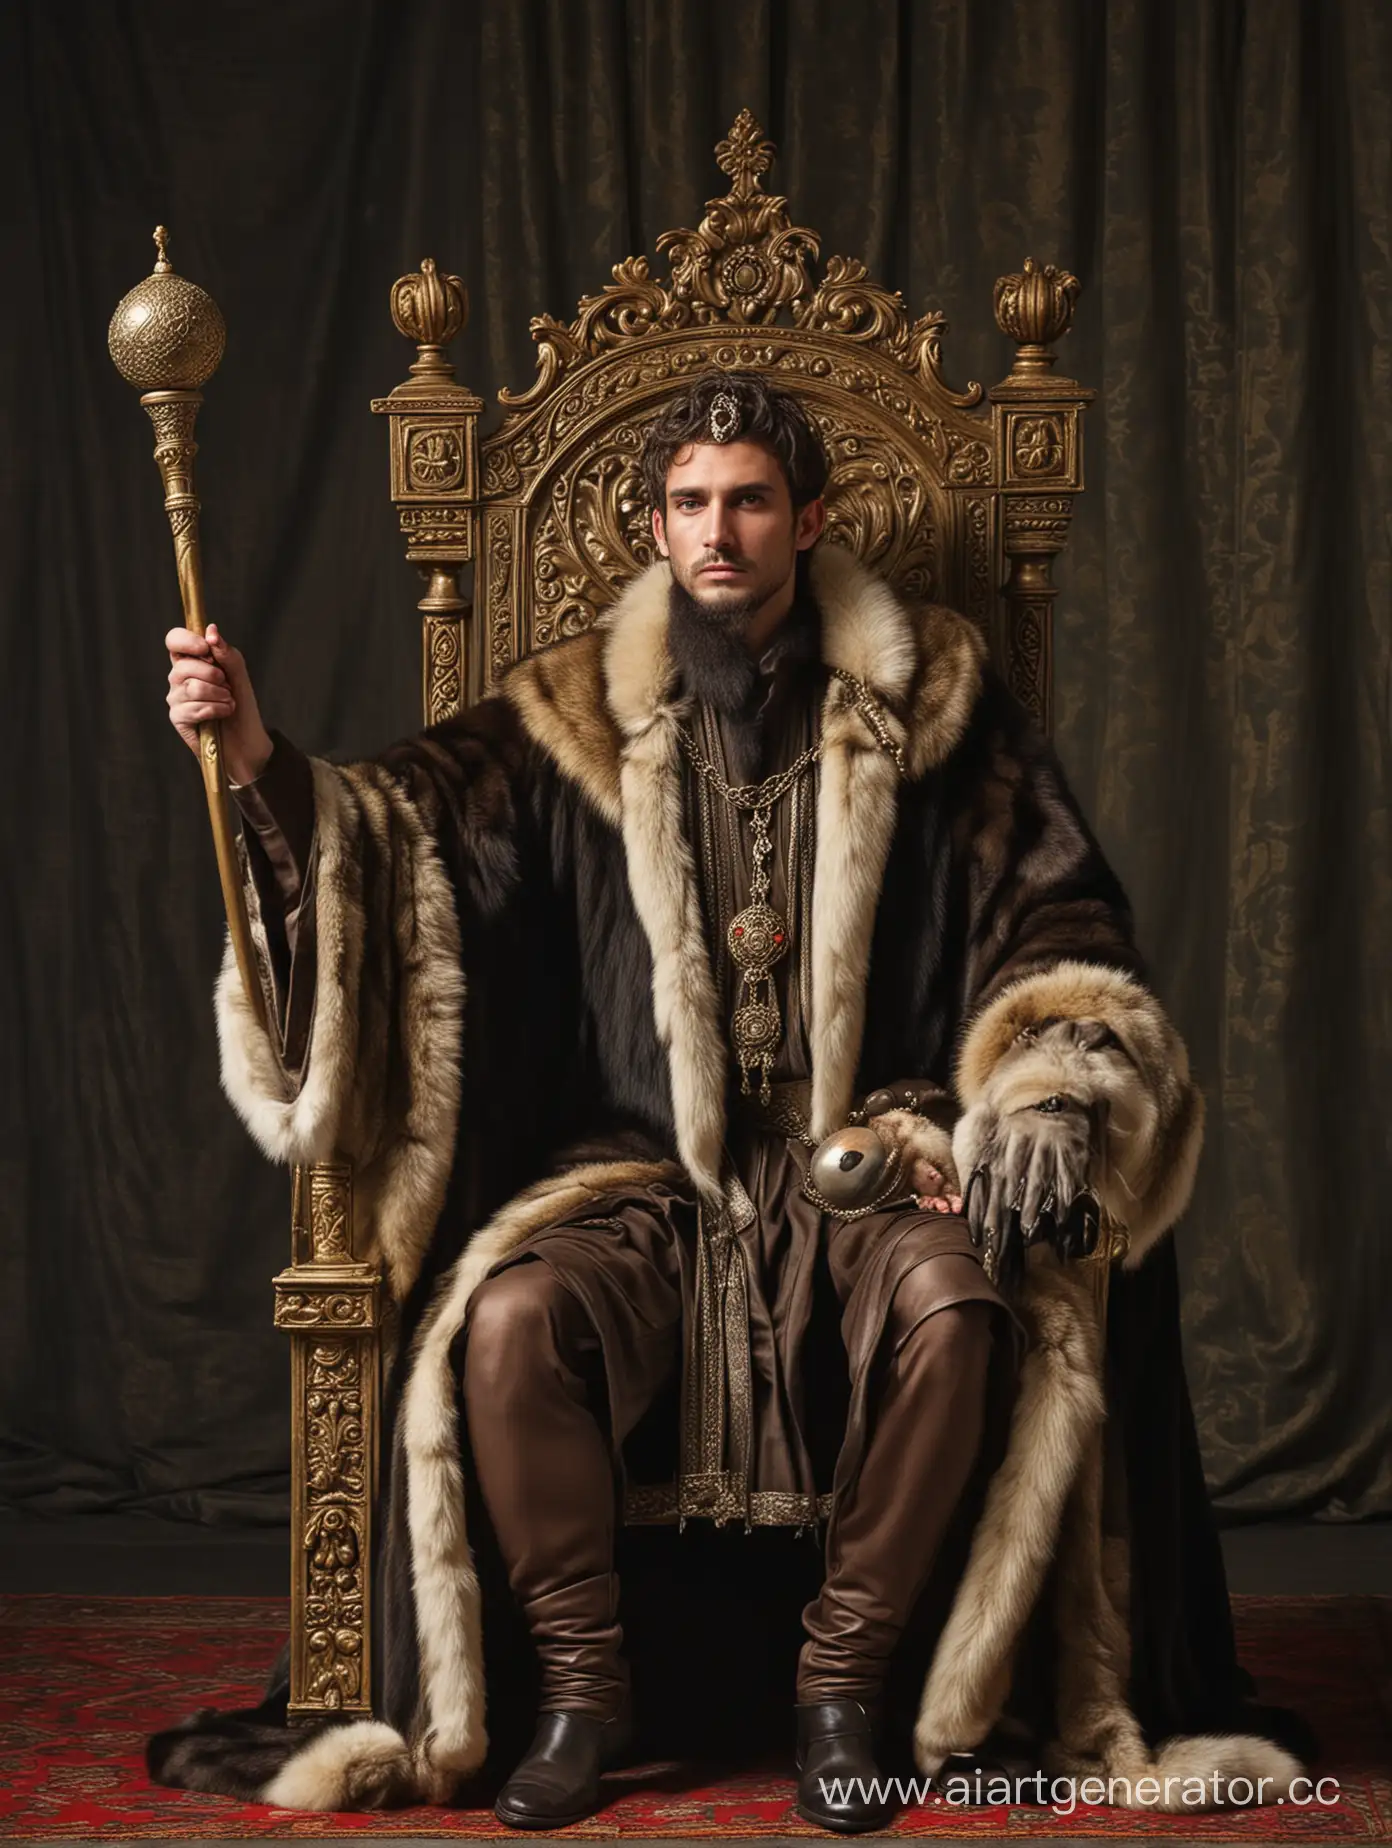 Regal-Man-on-Throne-with-Fur-Robe-Scepter-and-Orb